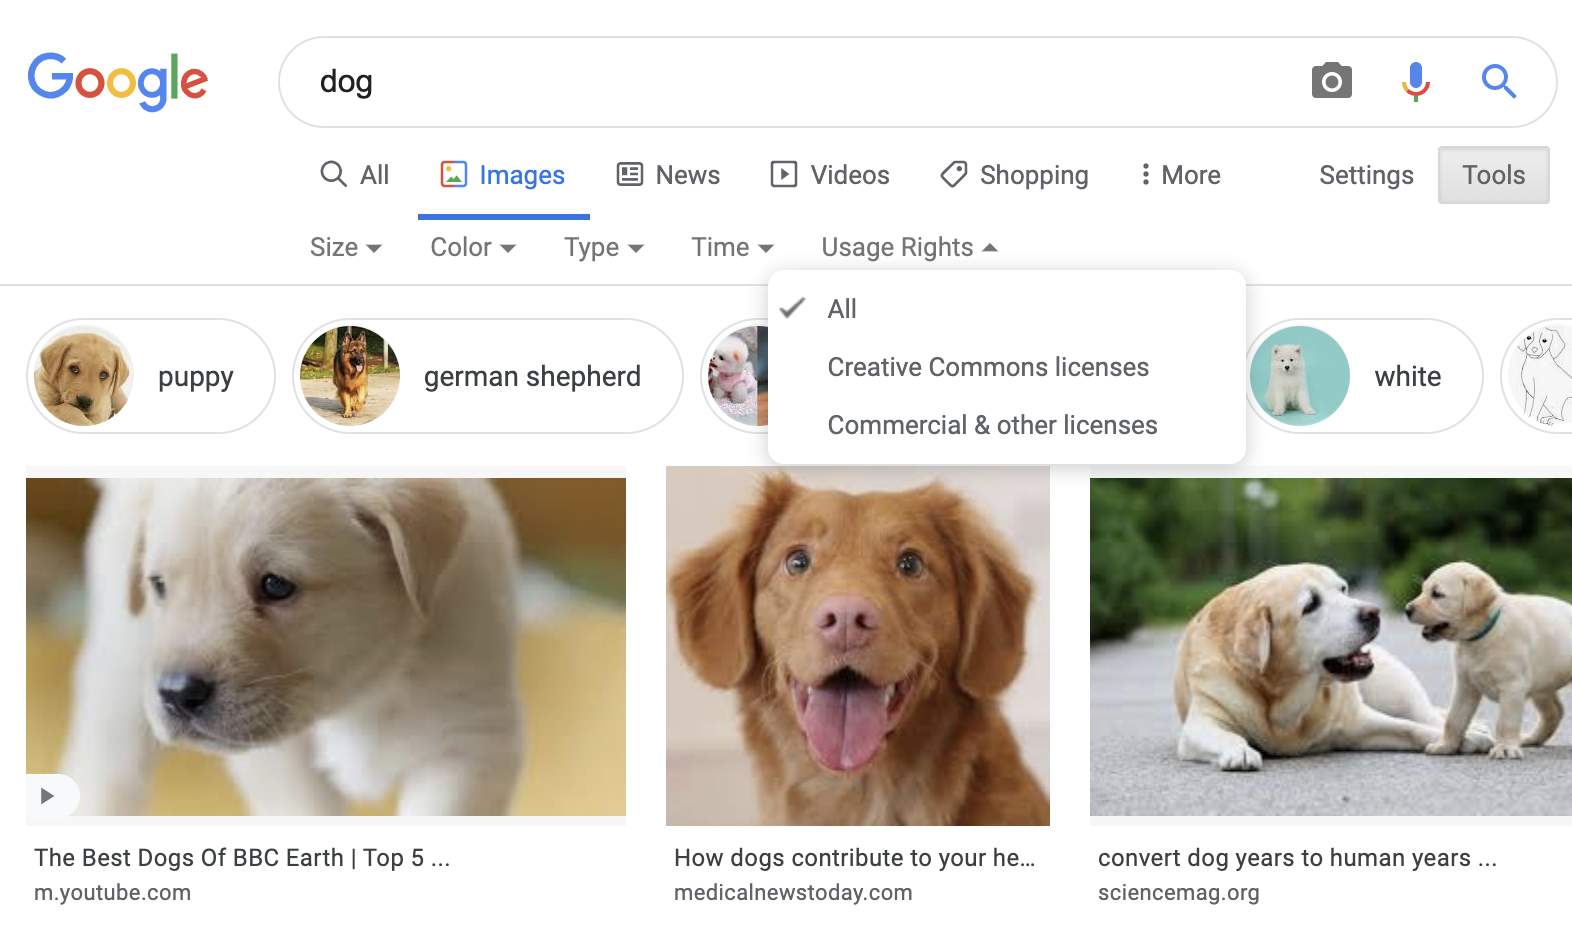 Google Removes ‘Labeled for Reuse’ Options from Image Search Tools